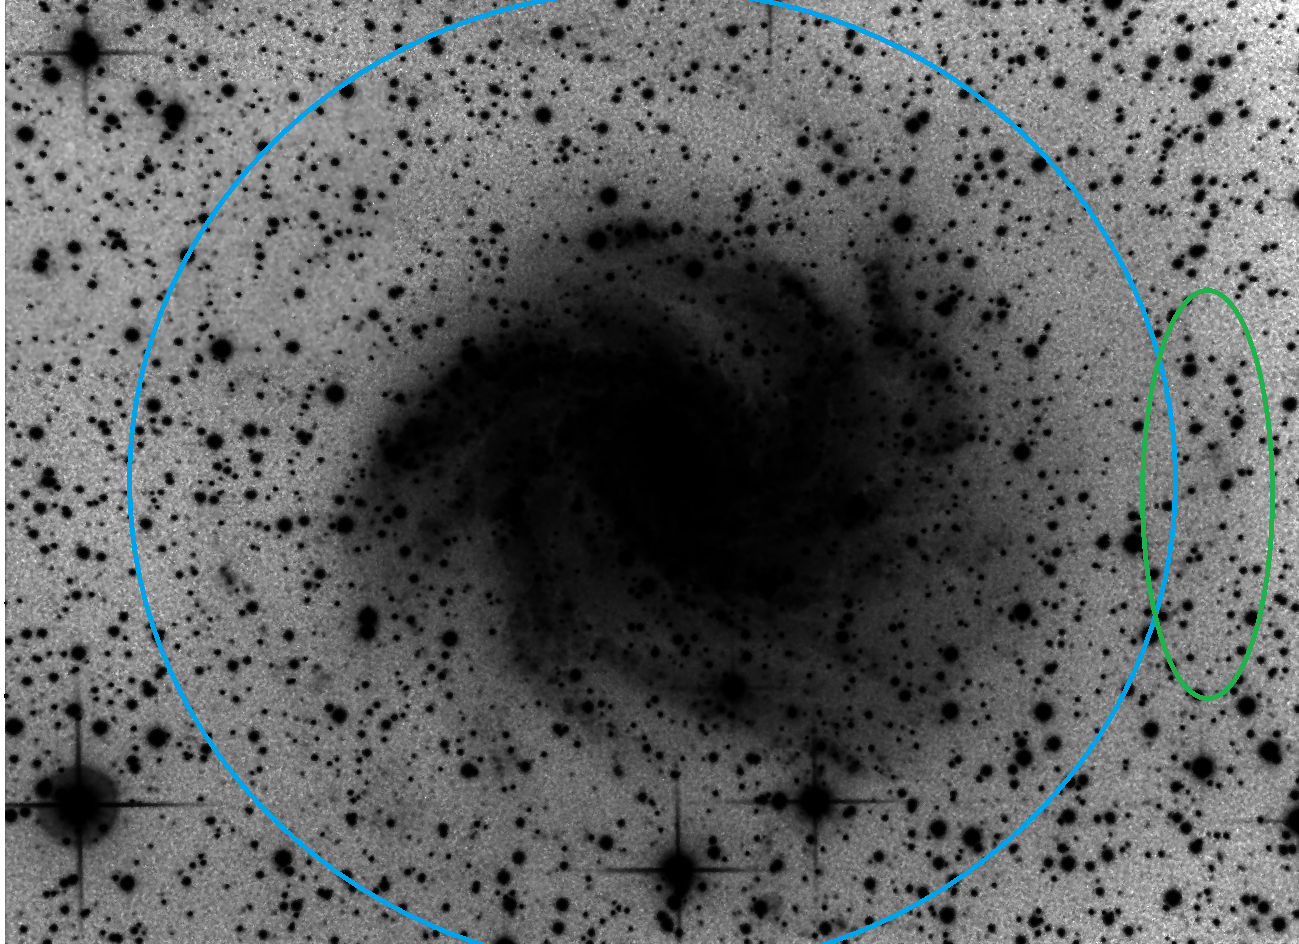 ngc6946allPNG.png.ef78fcab158734985830a04e278923e7.png